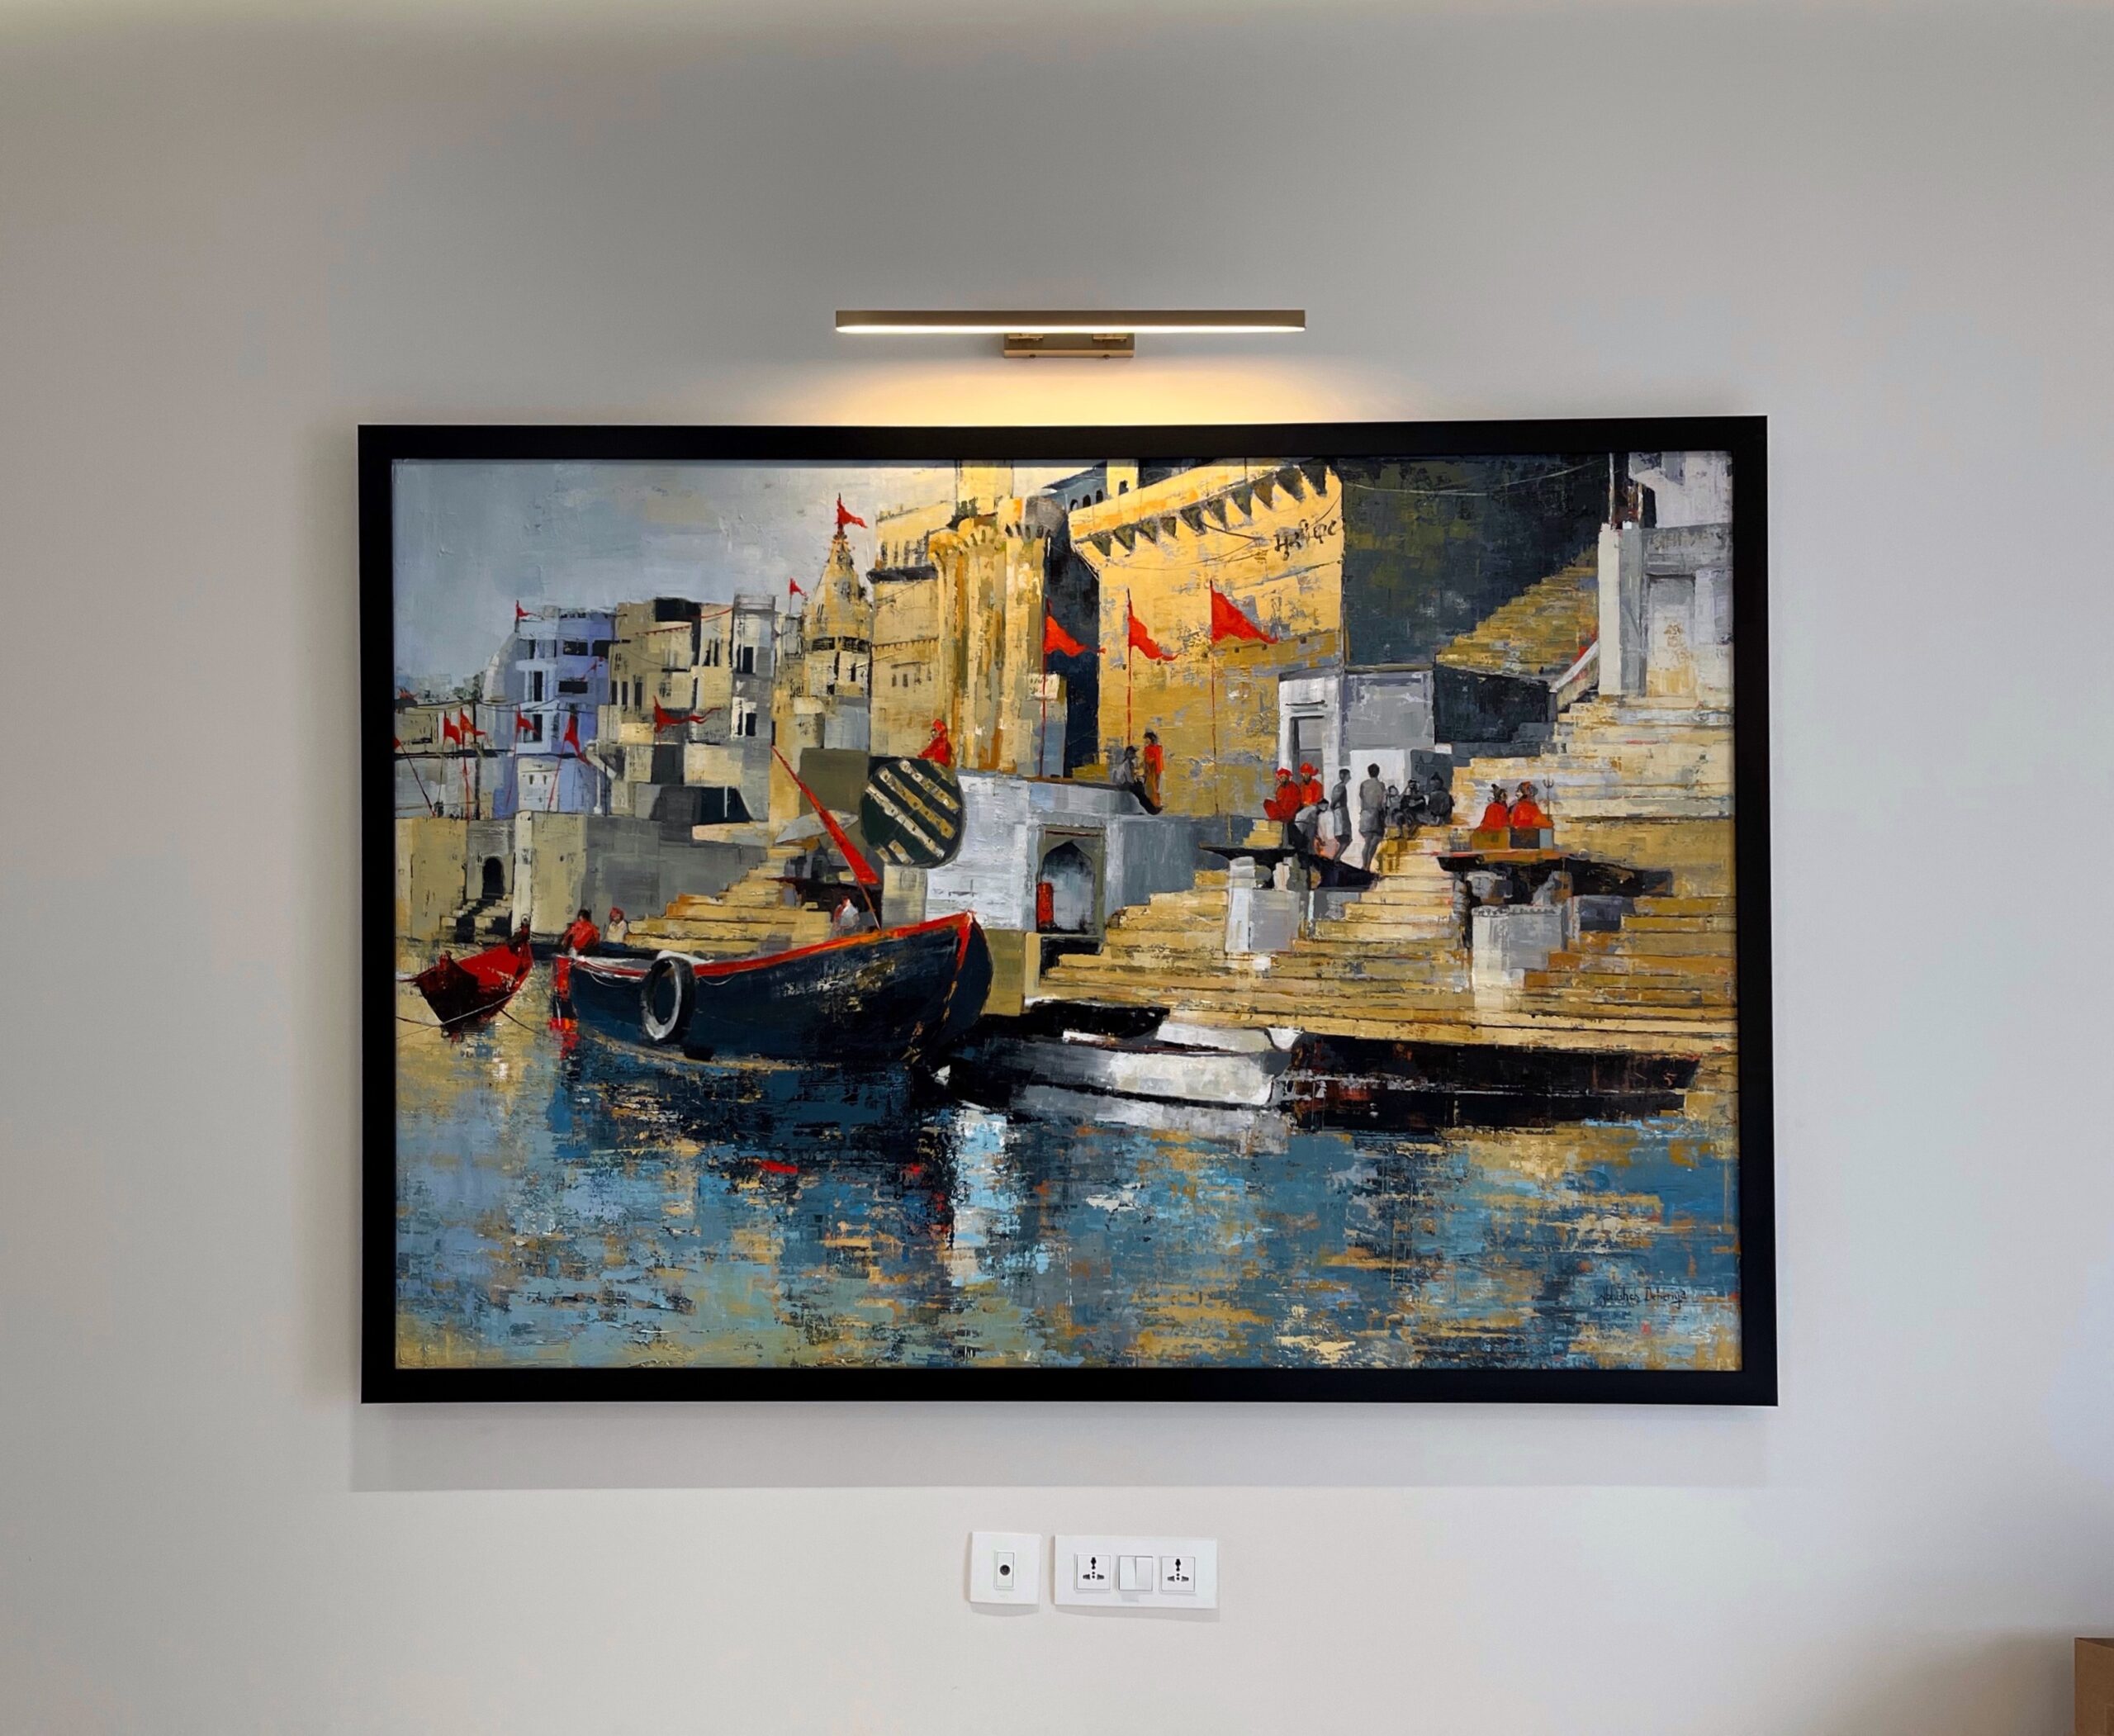 An exquisite painting depicting the Banaras Ghat, showcasing a vibrant and bustling riverside scene.